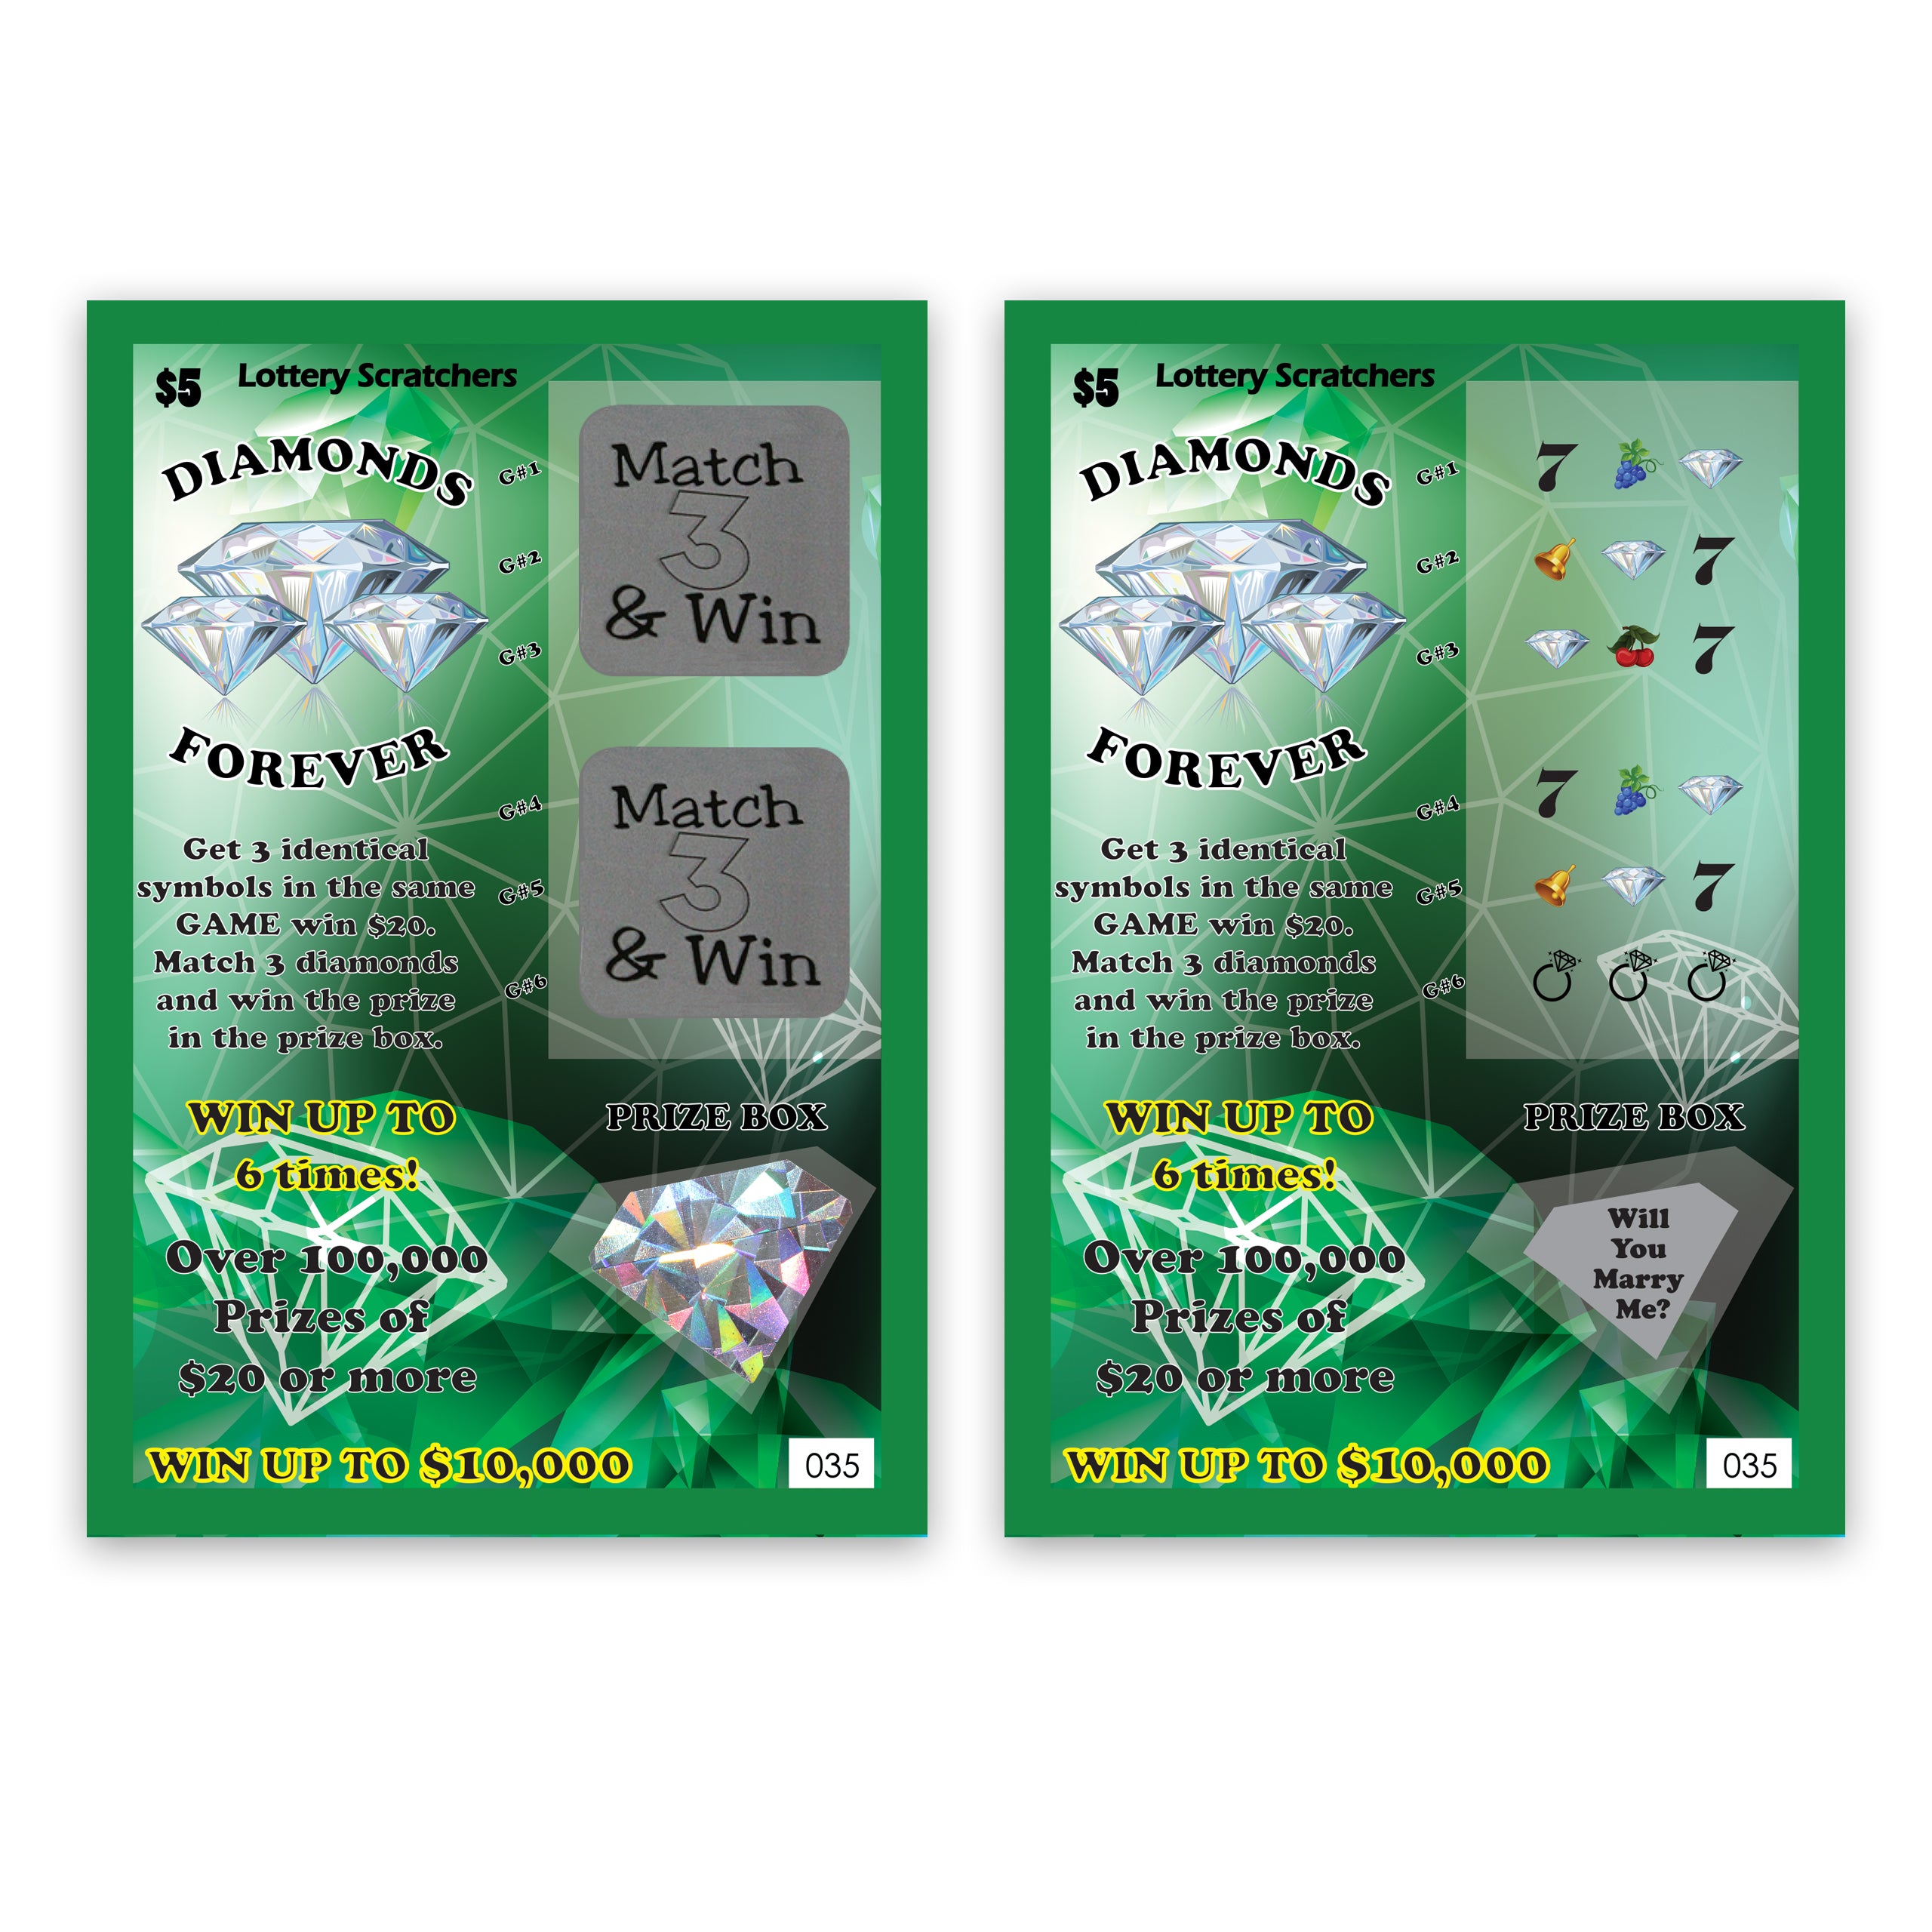 Will You Marry Me? Lotto Replica Scratch Off Card 4" x 6"